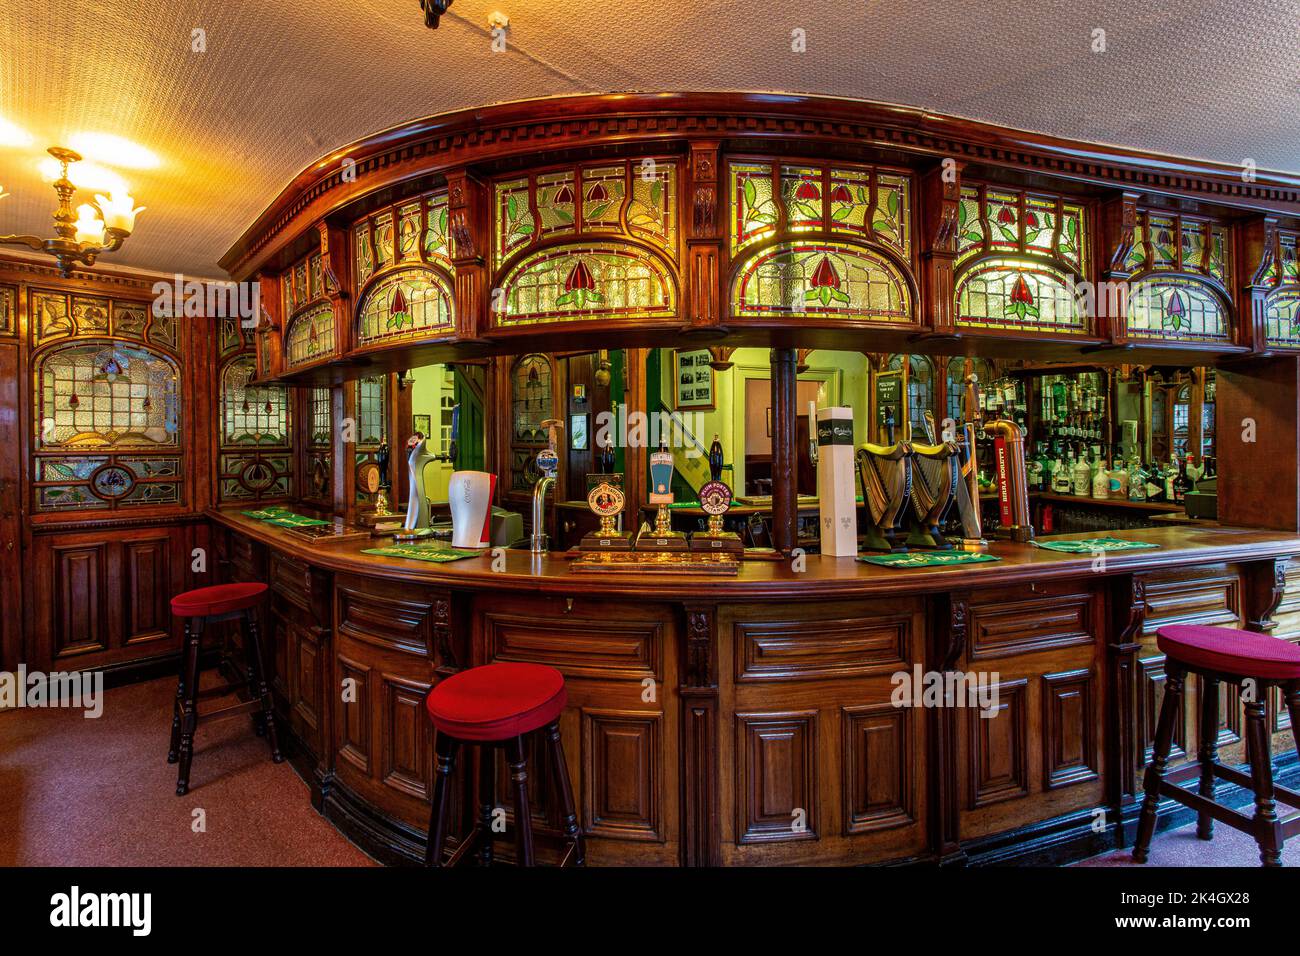 The Peveril of the Peak traditional English city pub, located on Great Bridgewater Street, Manchester, UK Stock Photo